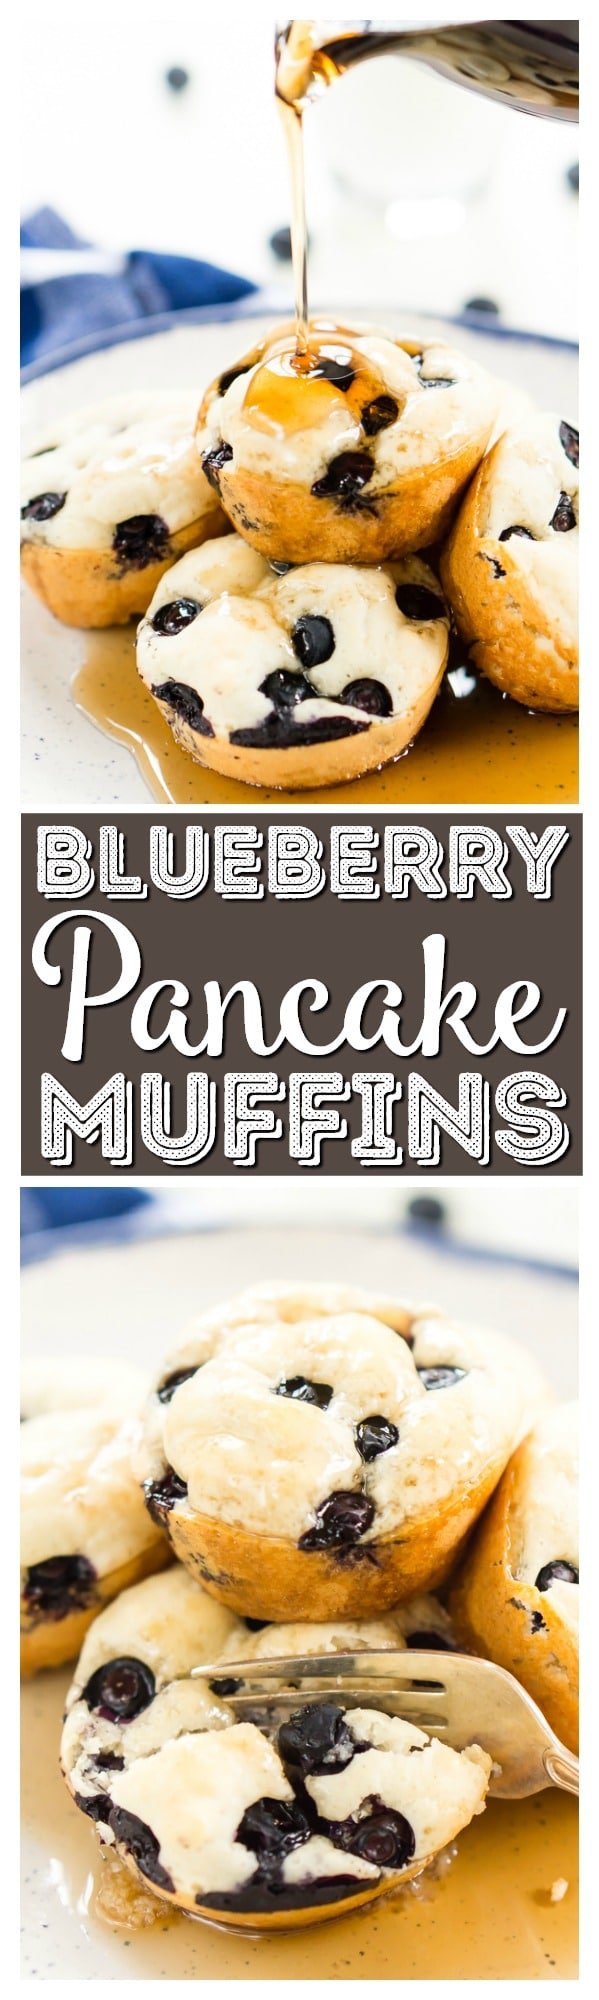 Blueberry Pancake Muffins are a simple, portable, 4-ingredient breakfast or snack both you and your kids will love. Perfect for those crazy school mornings or weekends on the go or you can enjoy them at home with butter and maple syrup! via @sugarandsoulco